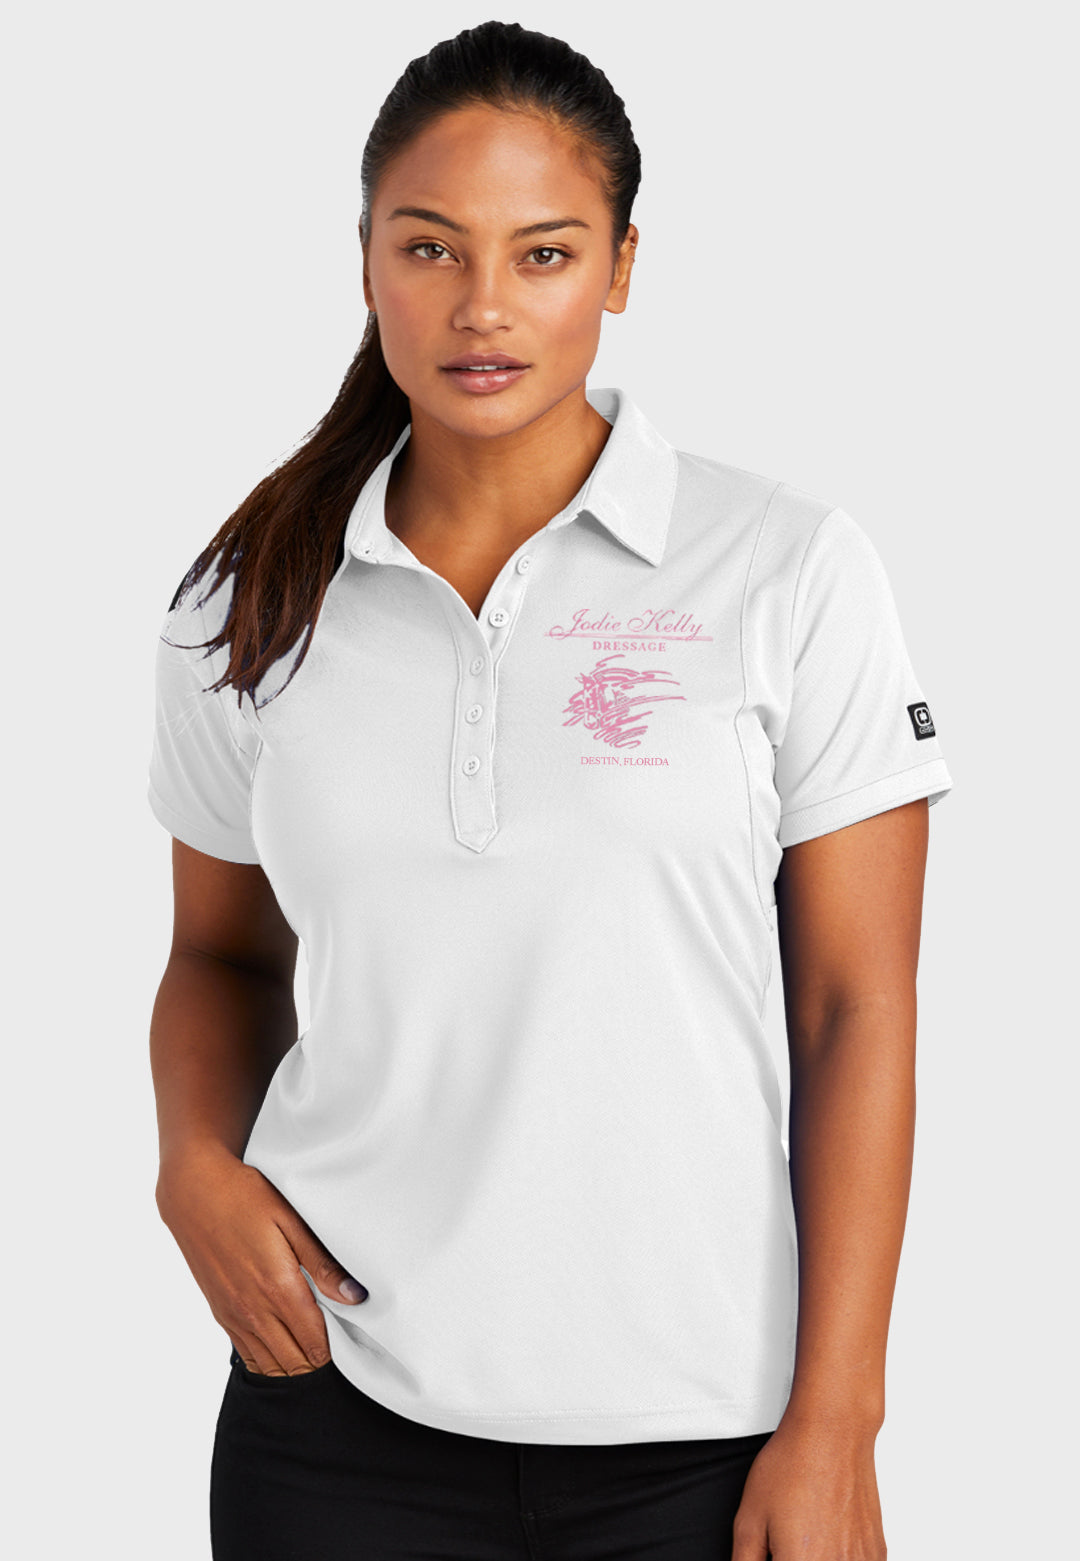 Jodie Kelly Dressage OGIO® - Jewel Polo - 3 Color Options